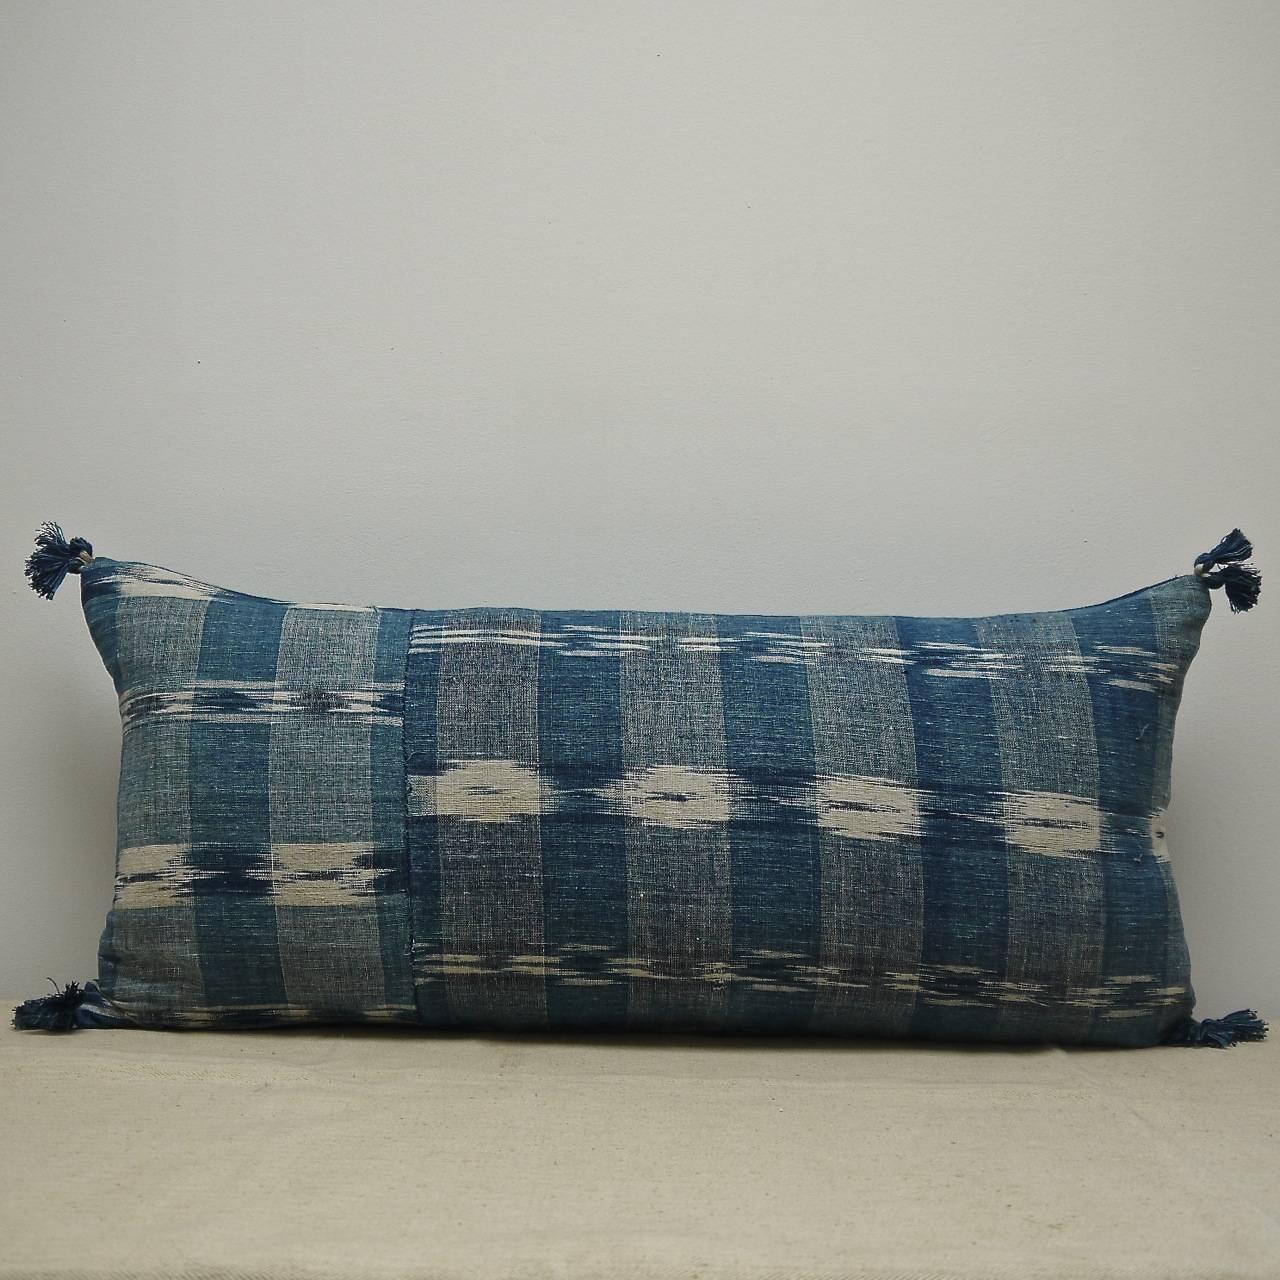 French indigo flamme linen and cotton mix cushion, circa 1800. Original seamed piece with two different flamme patterns. Antique French cotton tassels on each corner and backed in a hand dyed natural 19th century French linen. Slip-titched closed